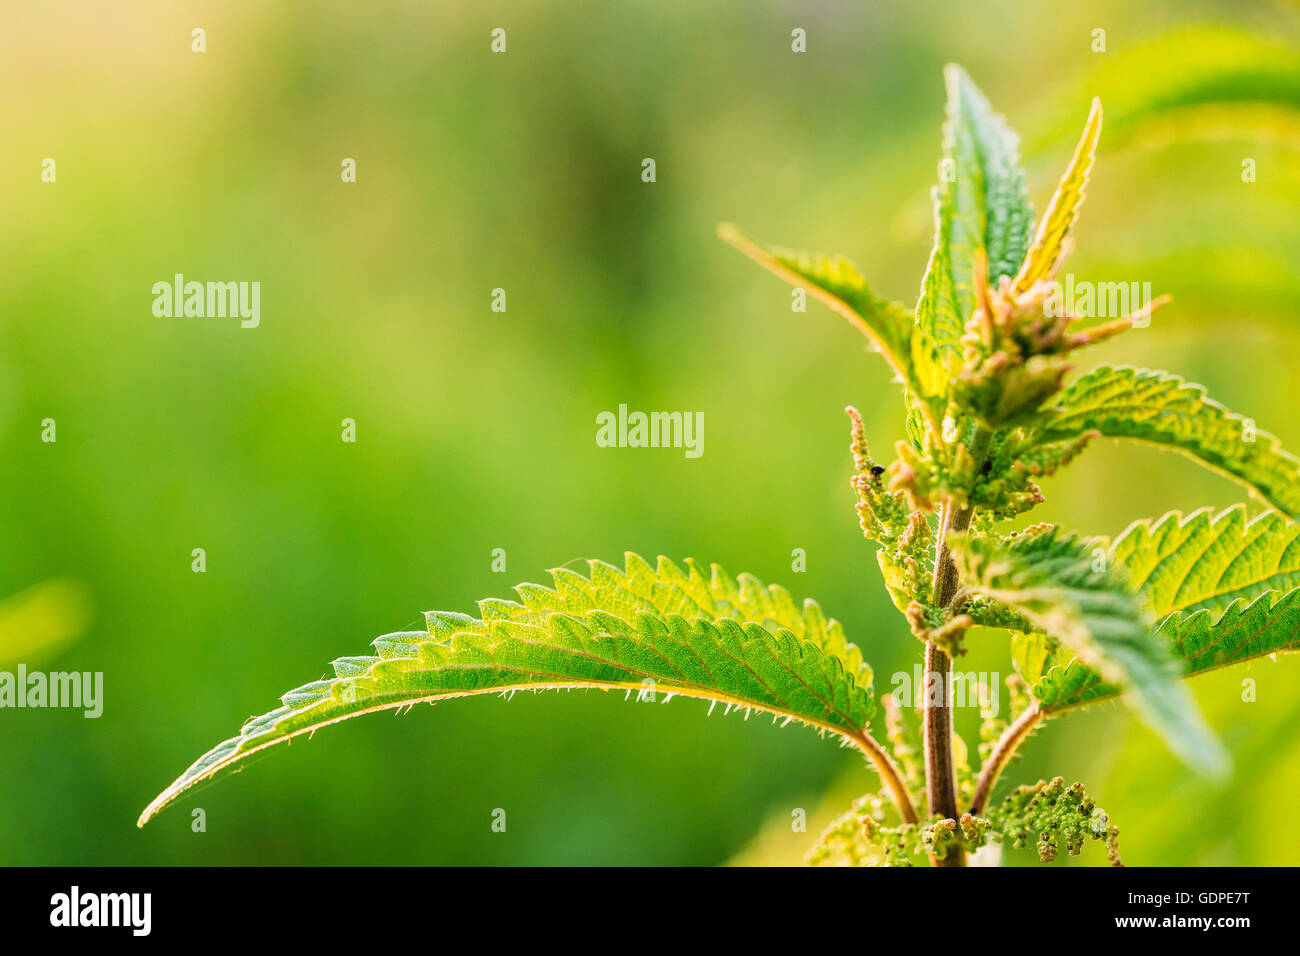 The Twig Of Wild Plant Nettle Or Stinging Nettle Or Urtica Dioica In Summer Spring Field At Sunset Sunrise. Close Up, Detail, At Stock Photo